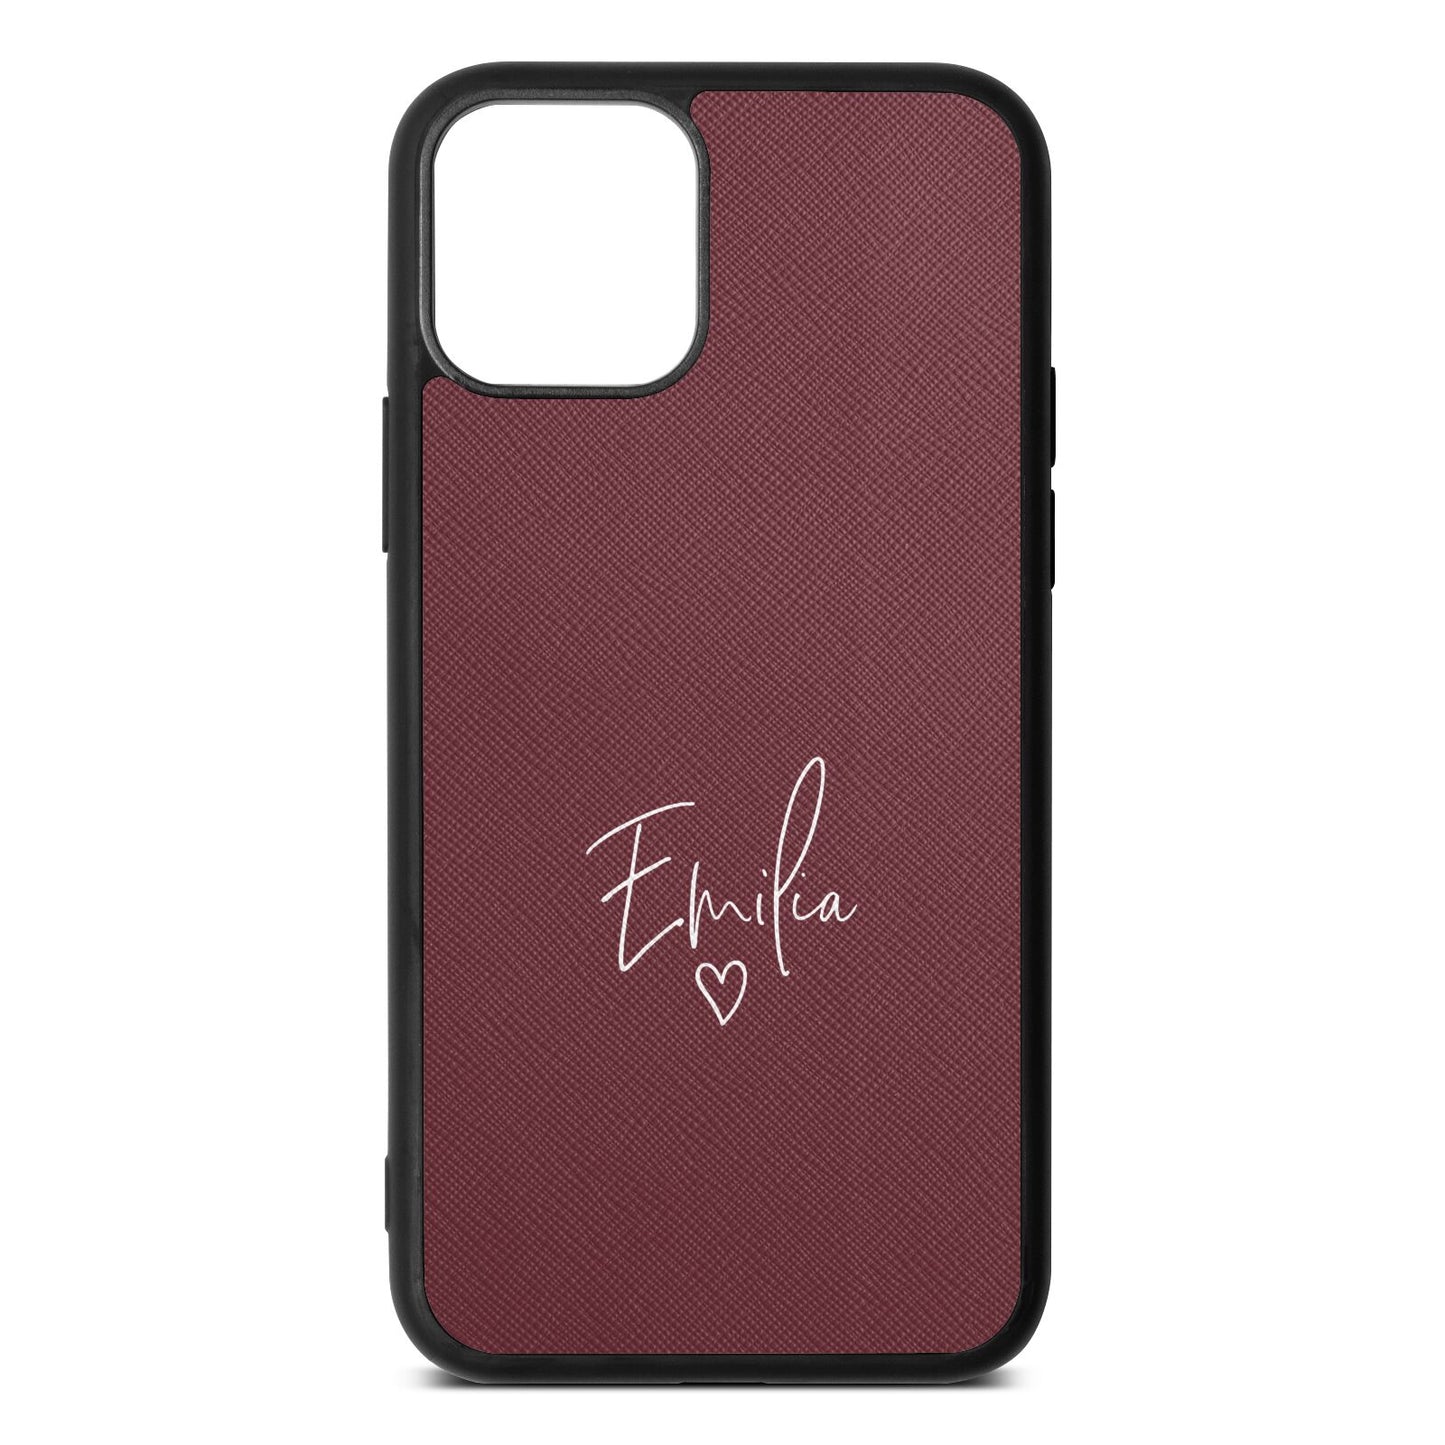 White Handwritten Name Transparent Rose Brown Saffiano Leather iPhone 11 Case